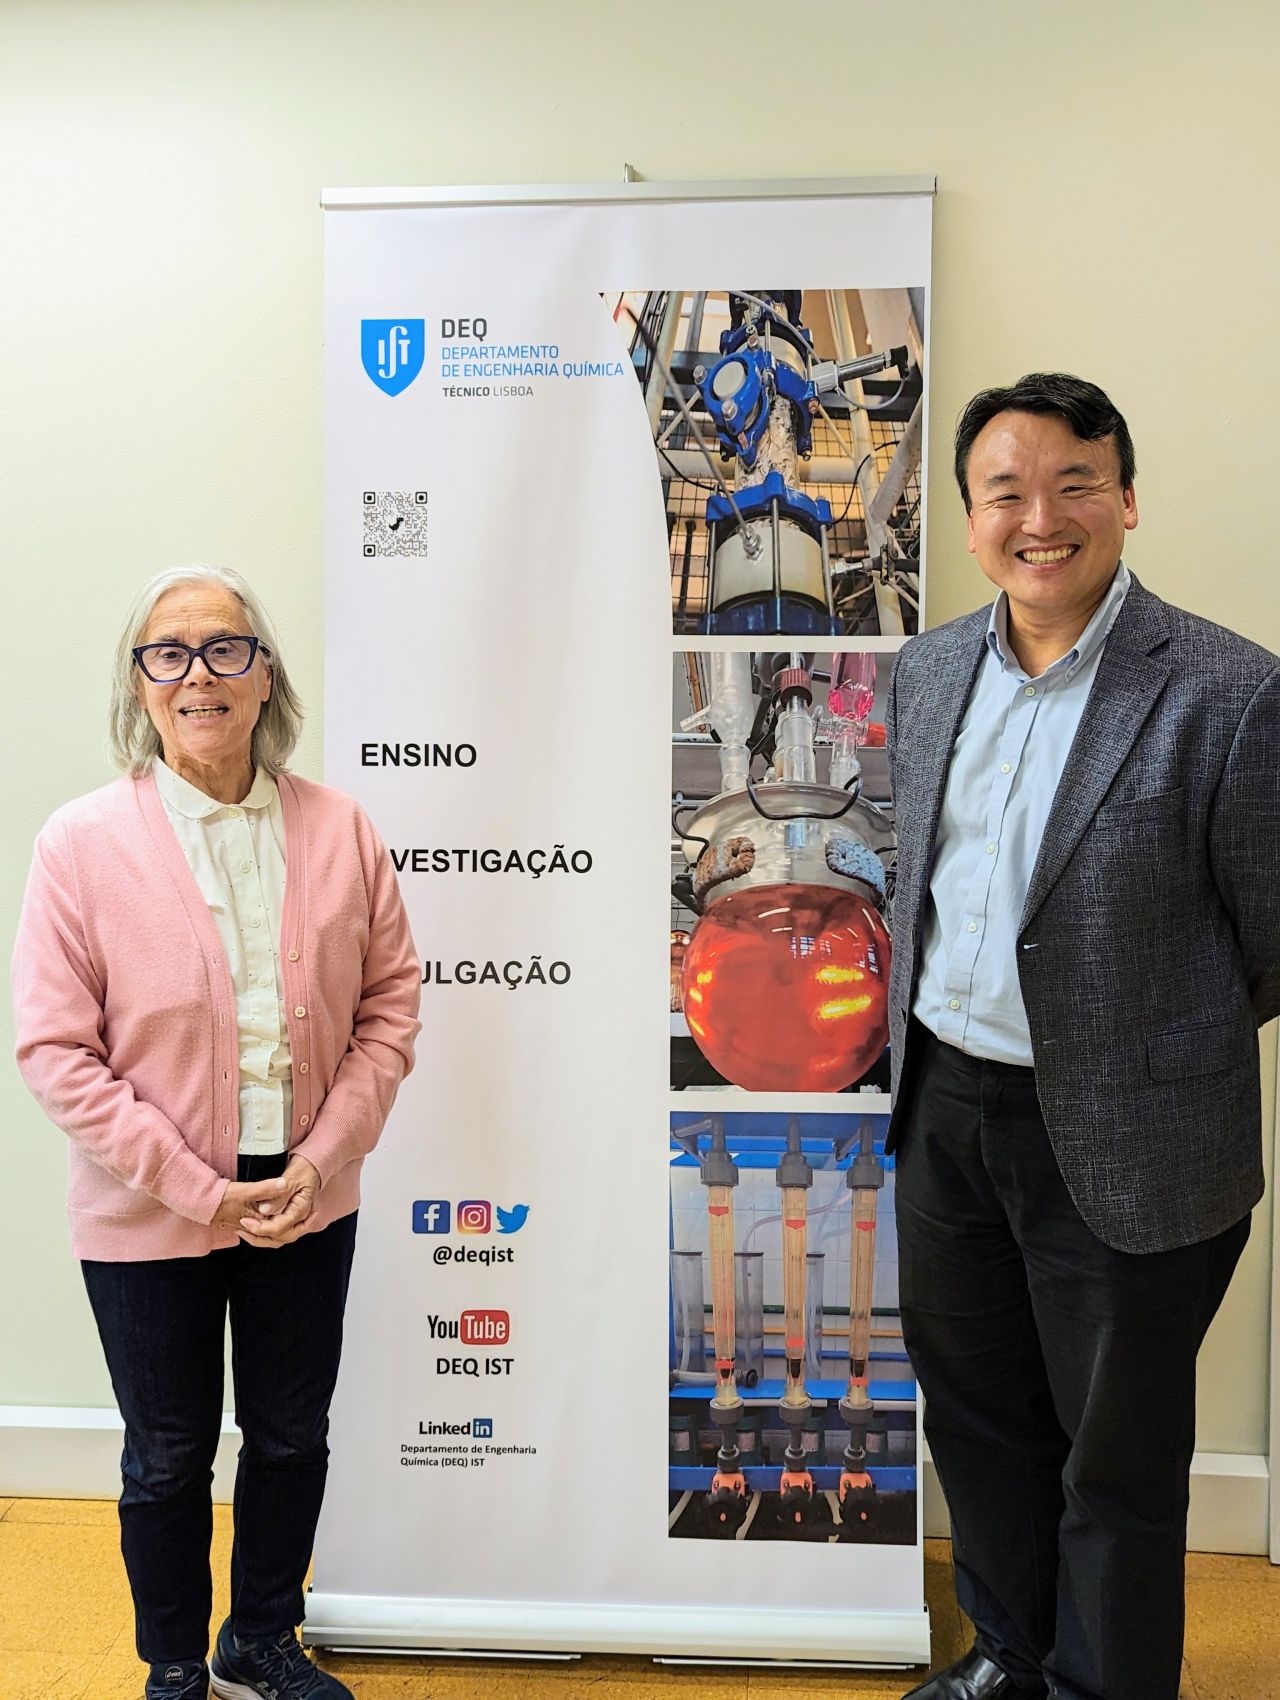 A female professor and a male professor standing in front of a banner.